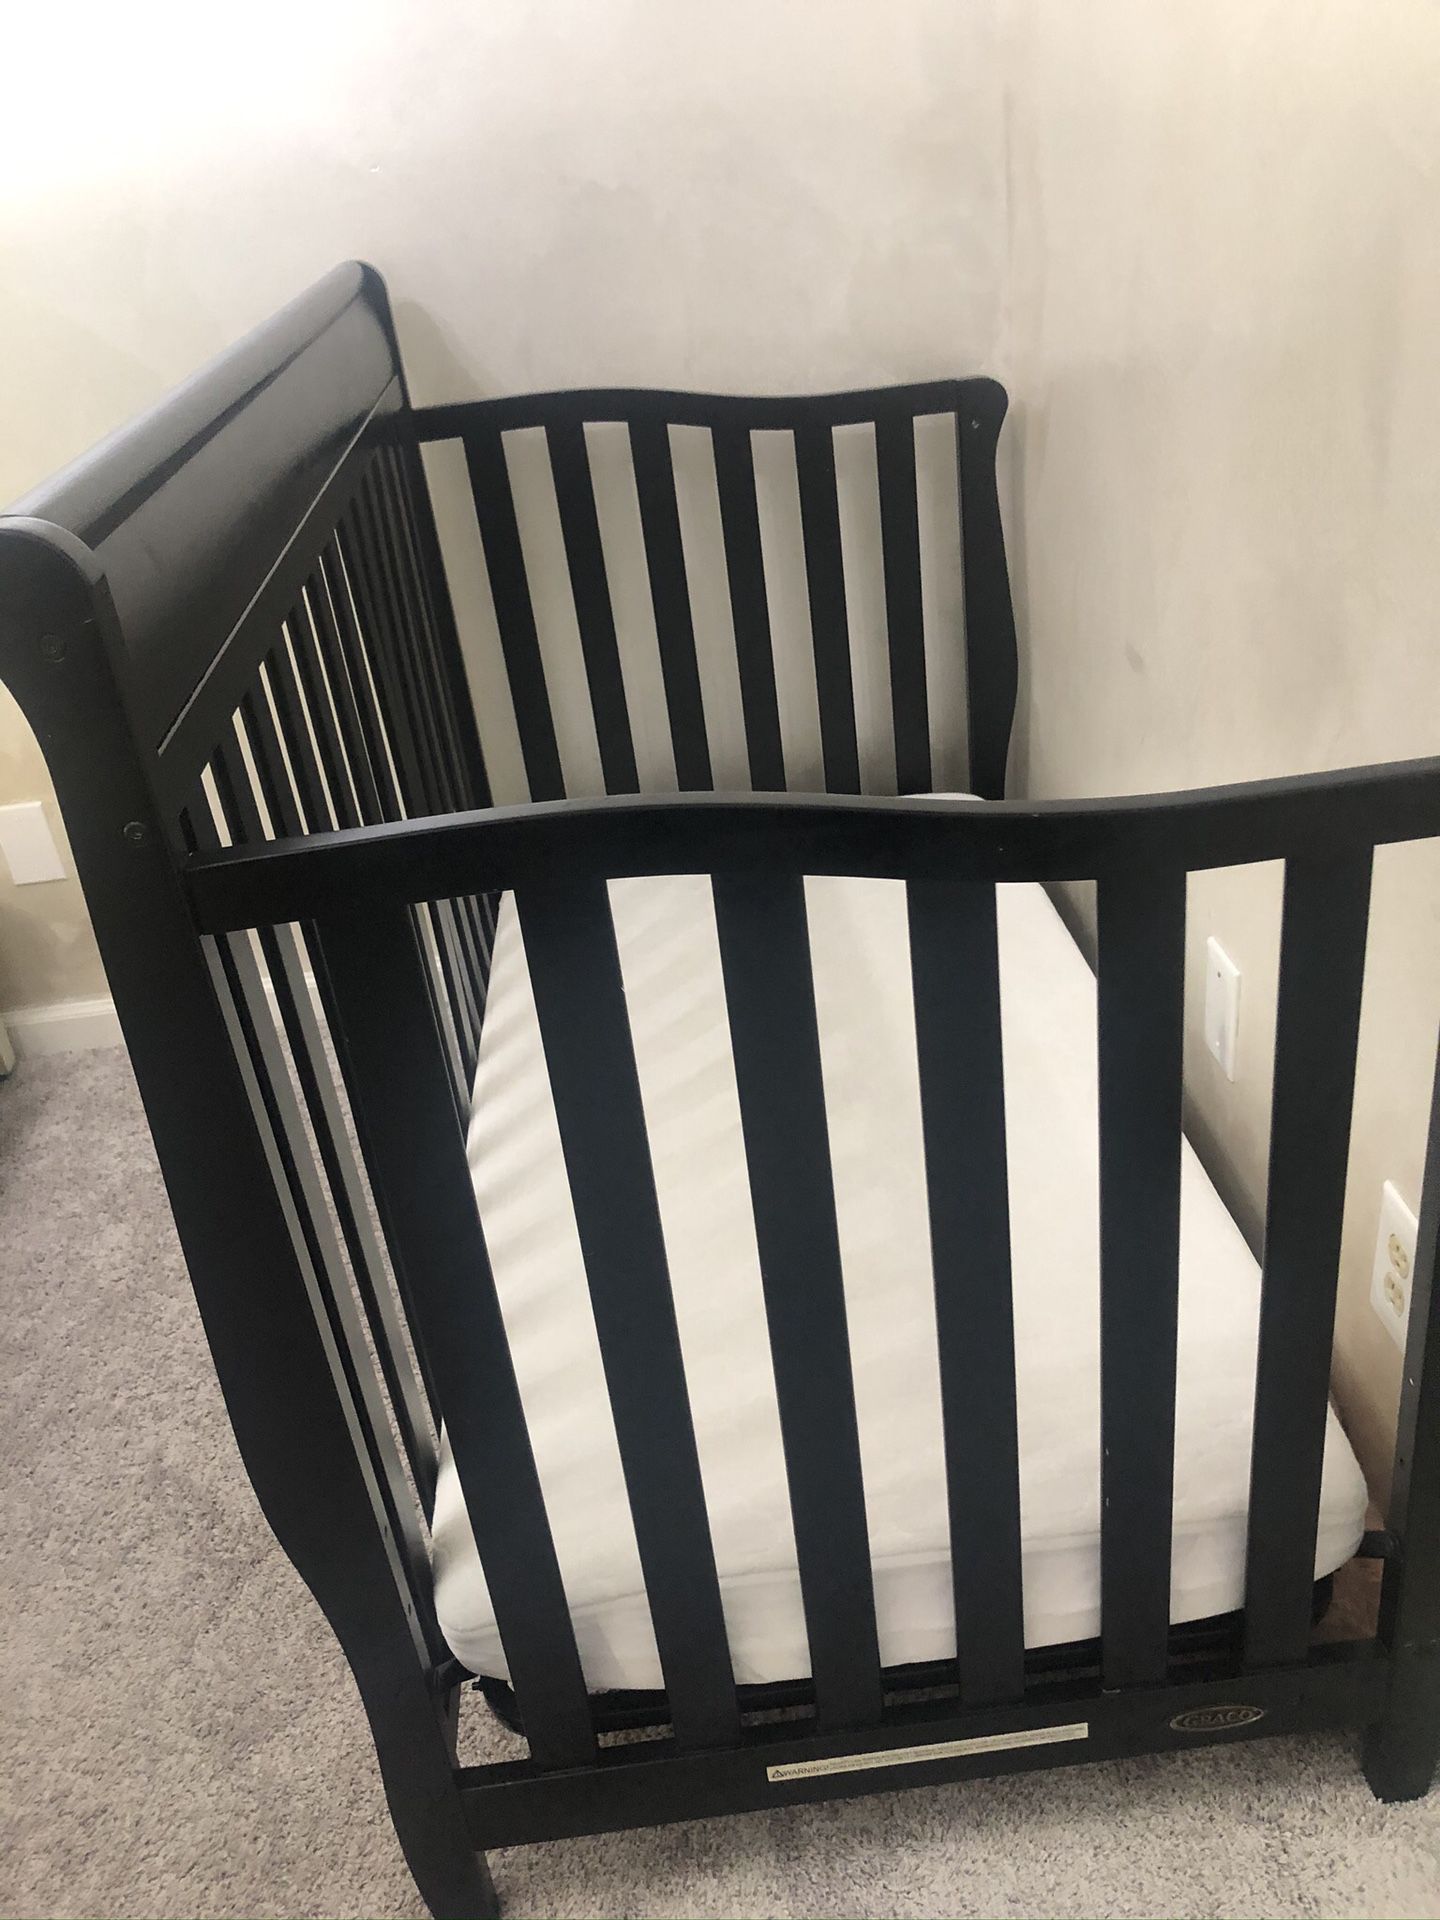 Crib in awesome condition, just used a few times stroller is brand new in box